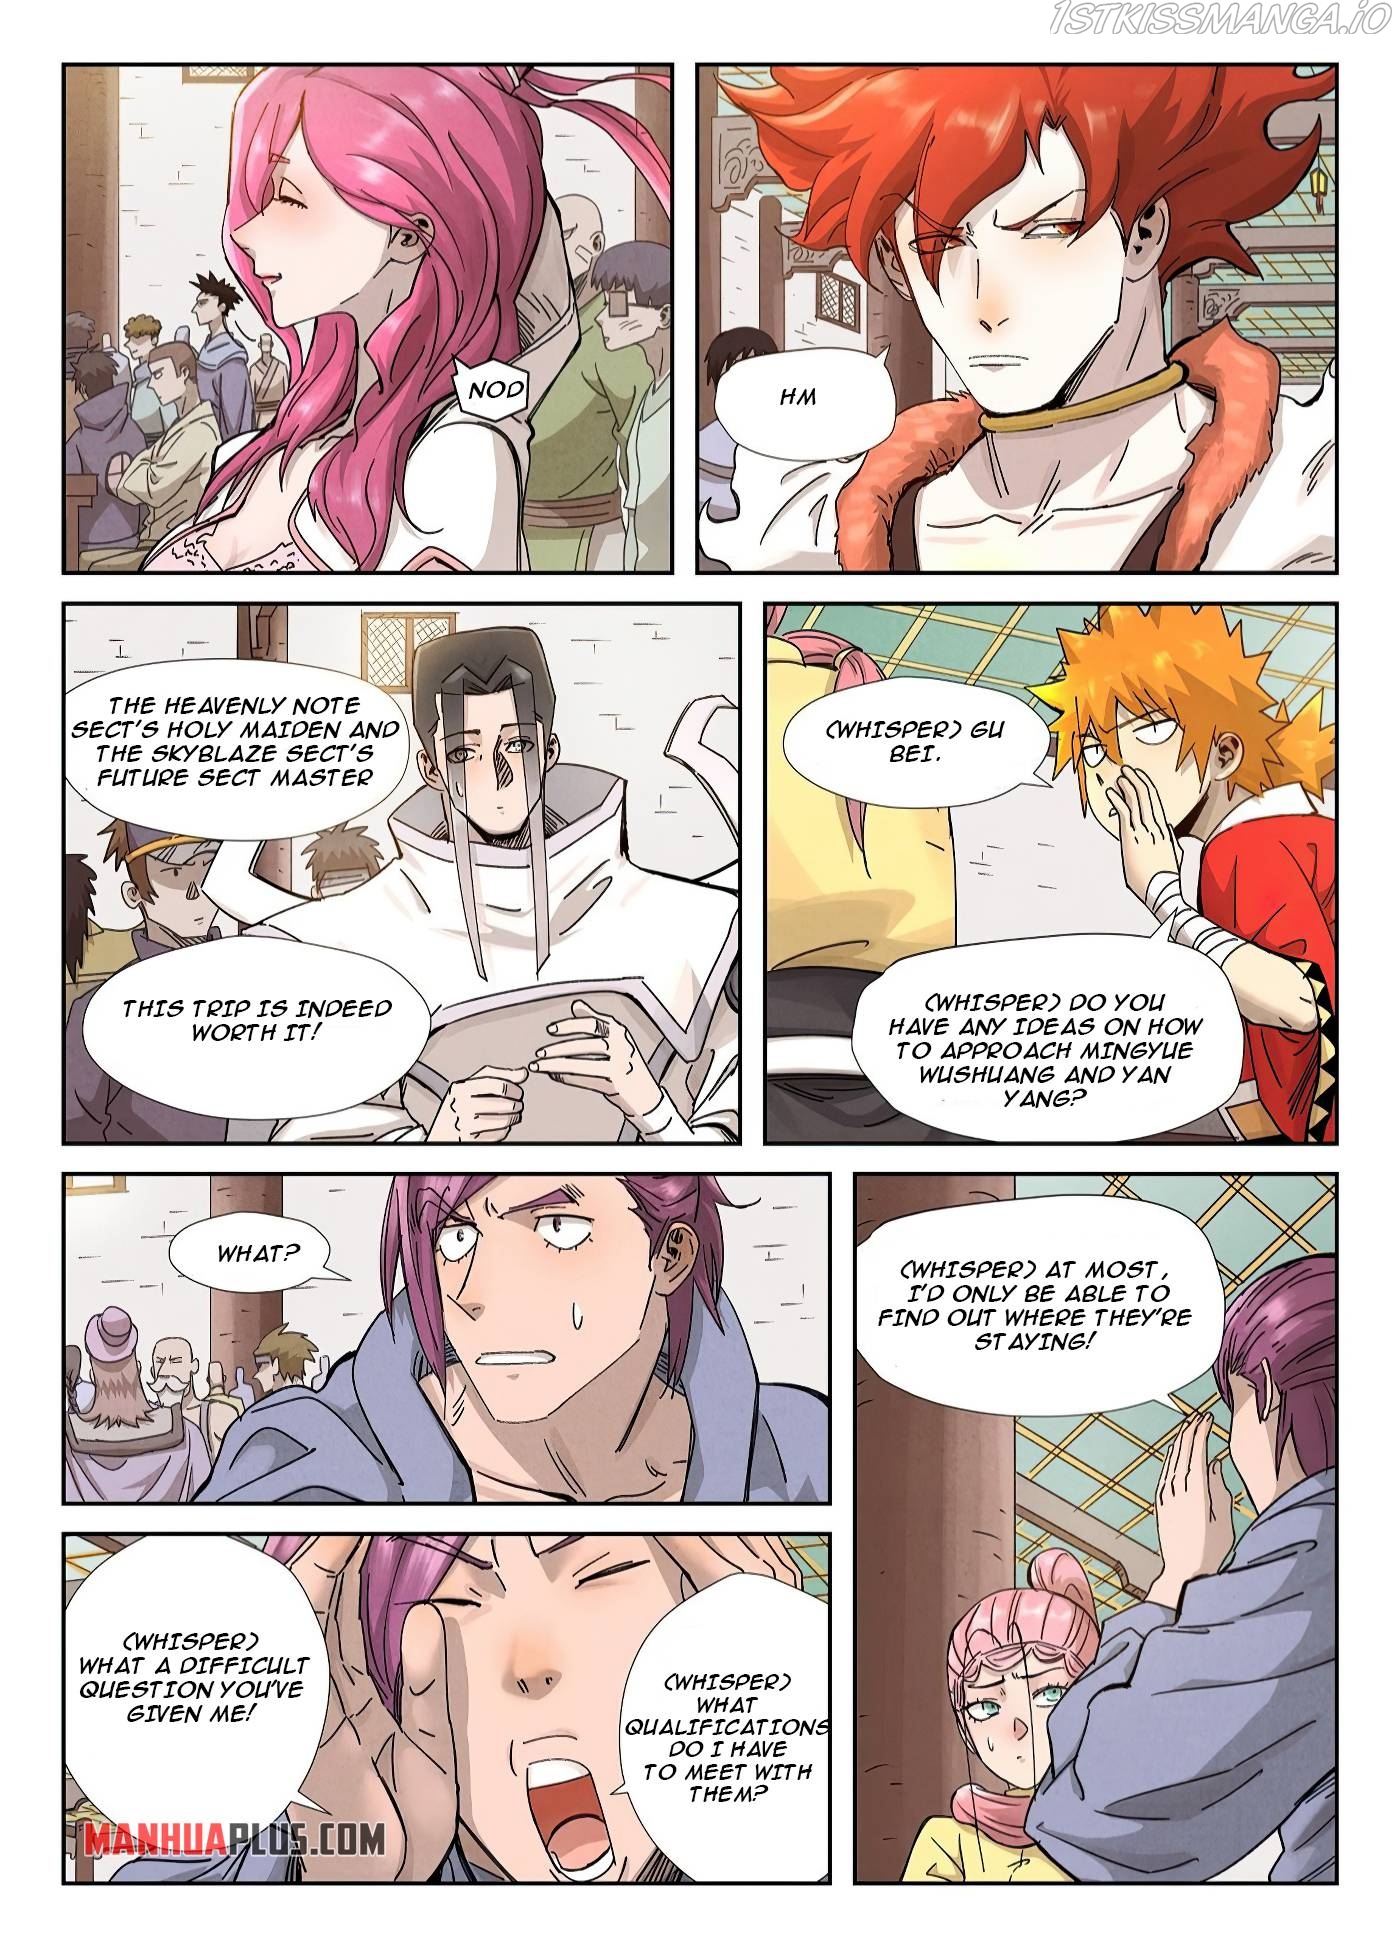 Tales of Demons and Gods Manhua Chapter 336.1 - Page 3